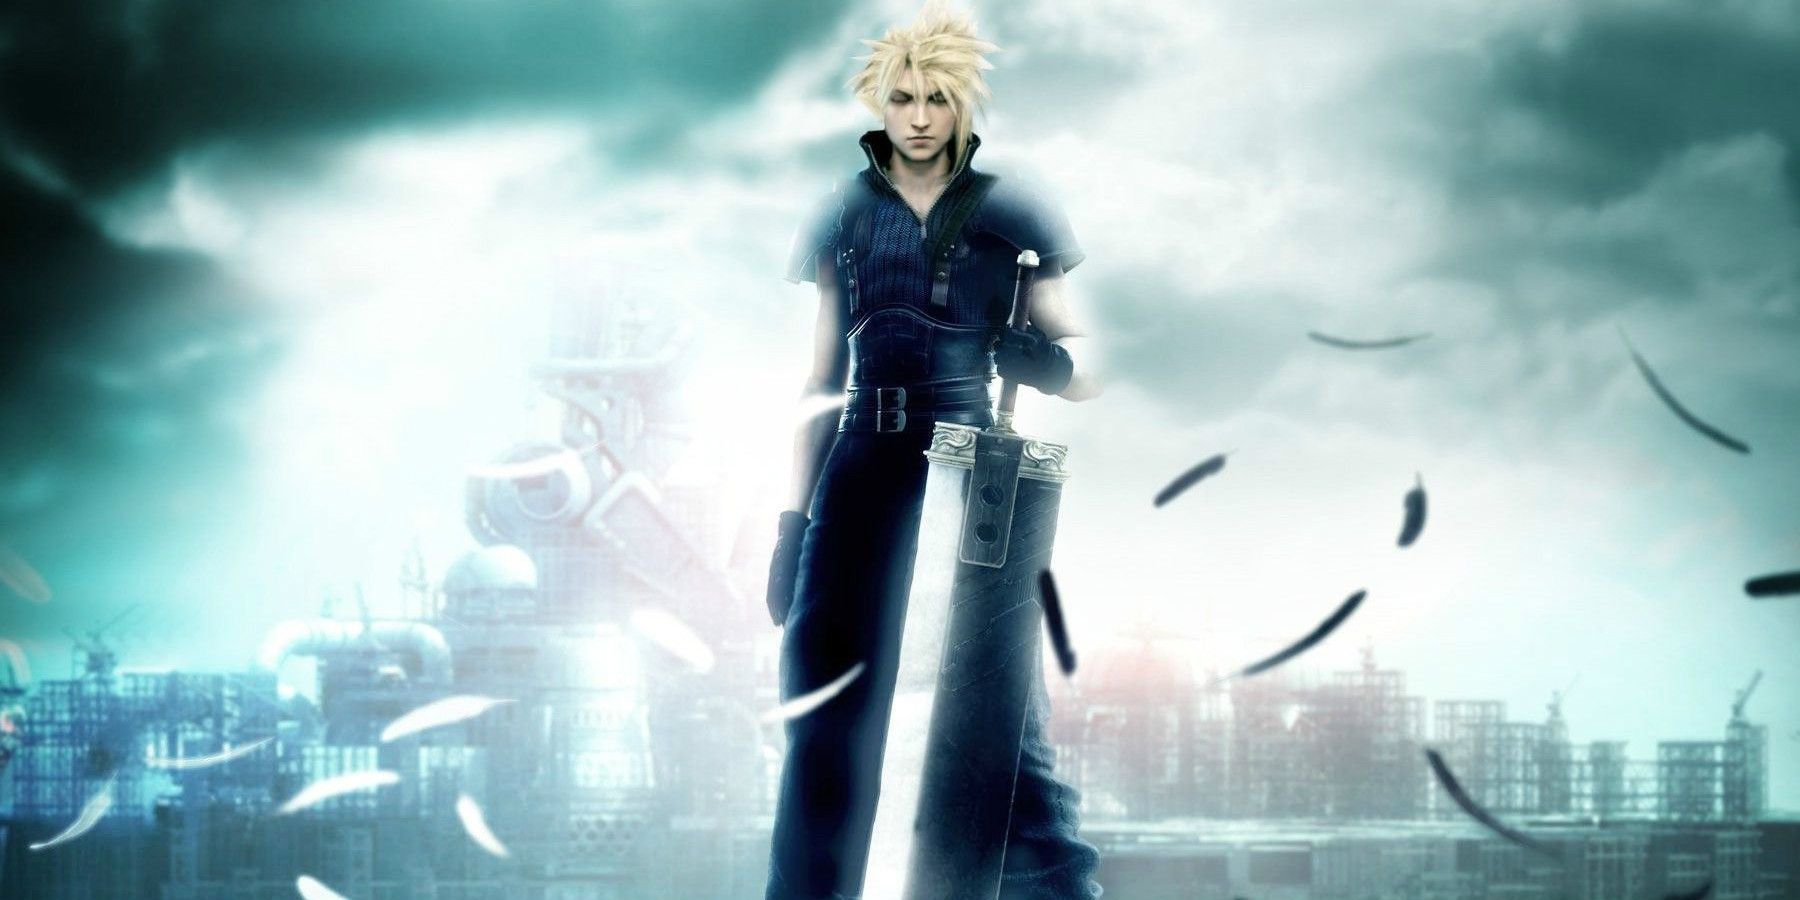 Cloud with his sword in Final Fantasy VII